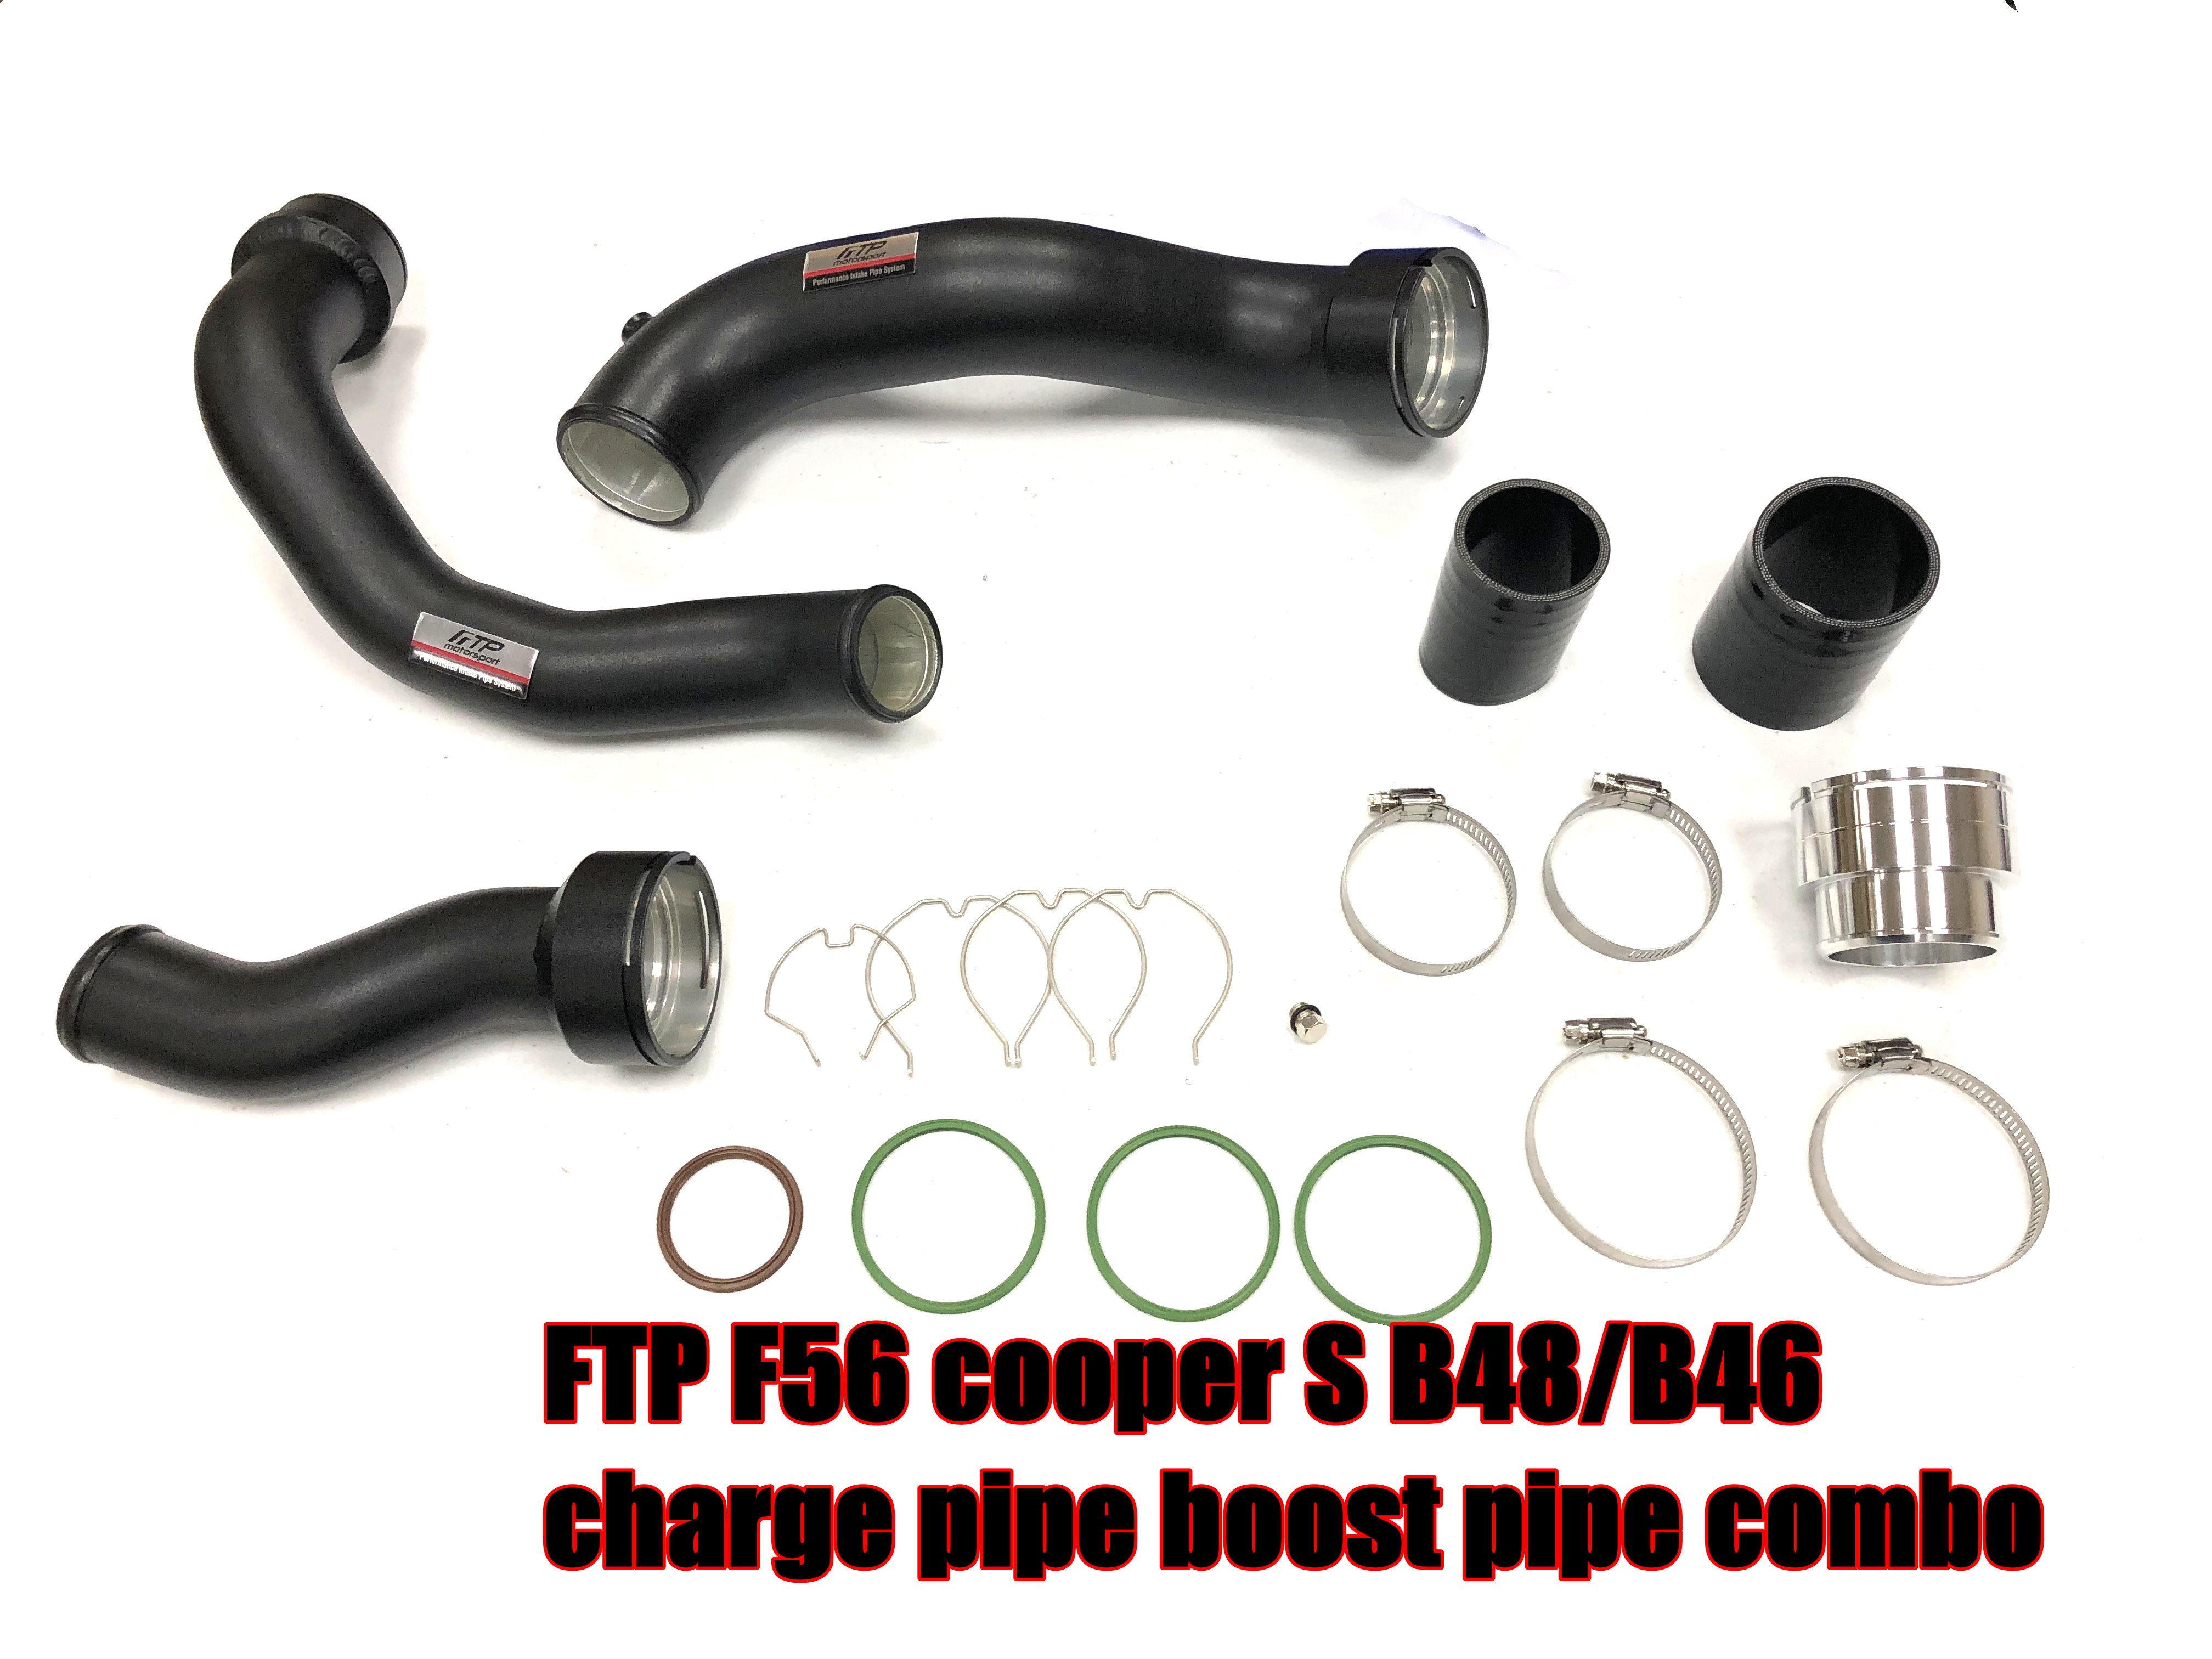 FTP Turbo Charge Pipe Kit for BMW B48 B46 Charge Pipe Aluminum